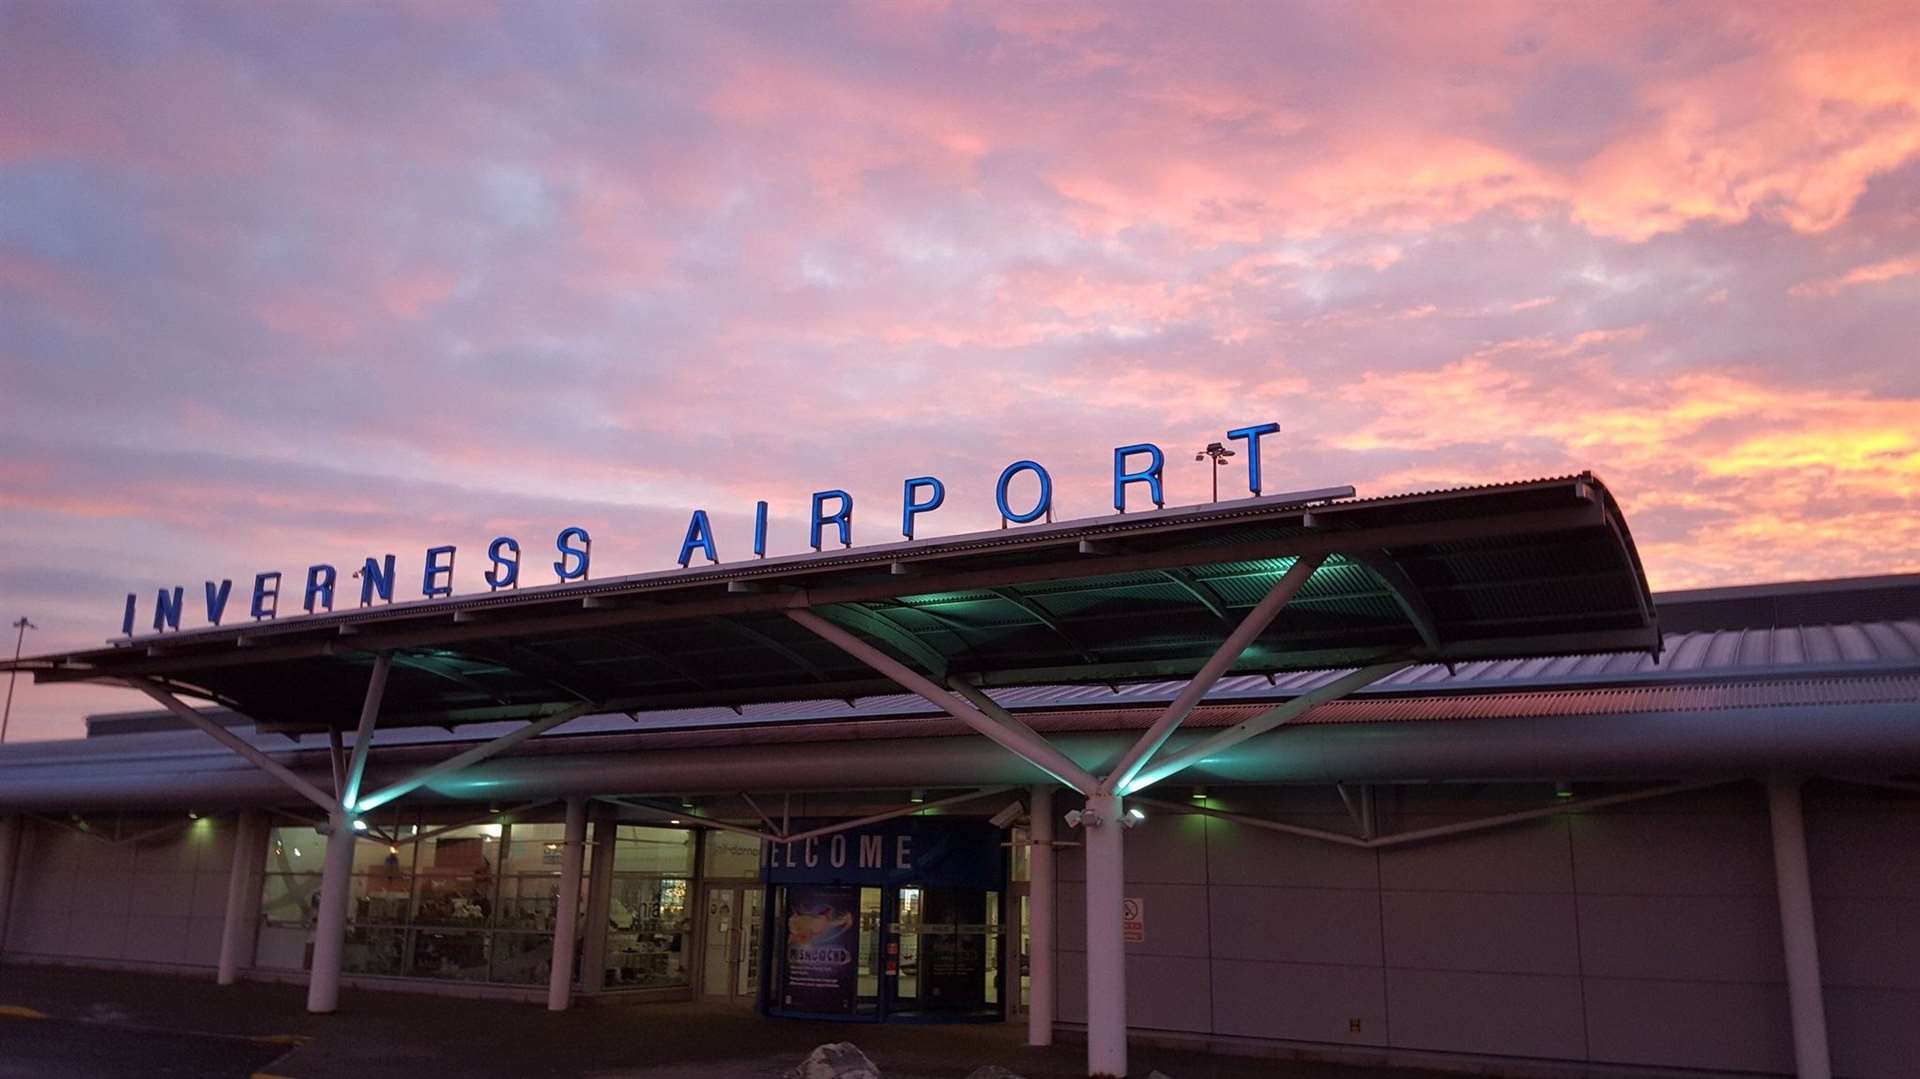 Inverness Airport has been named the best in Europe with under two million passengers annually.